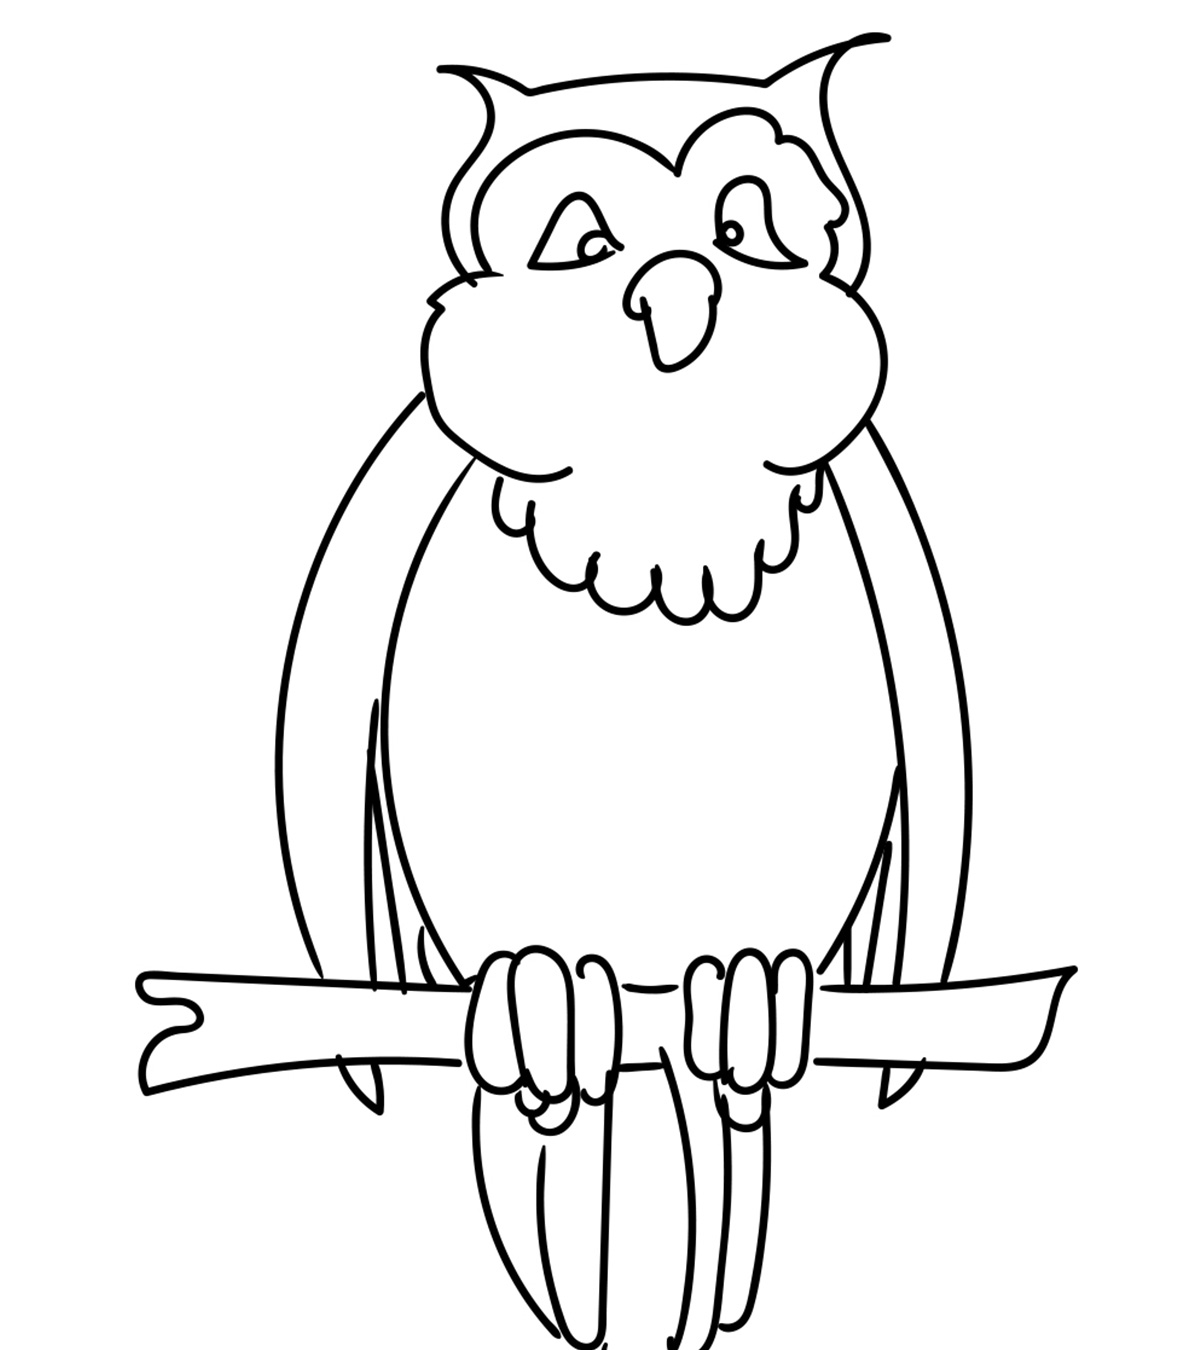 Top 25 Owl Coloring Pages Your Toddler Will Love To Color_image